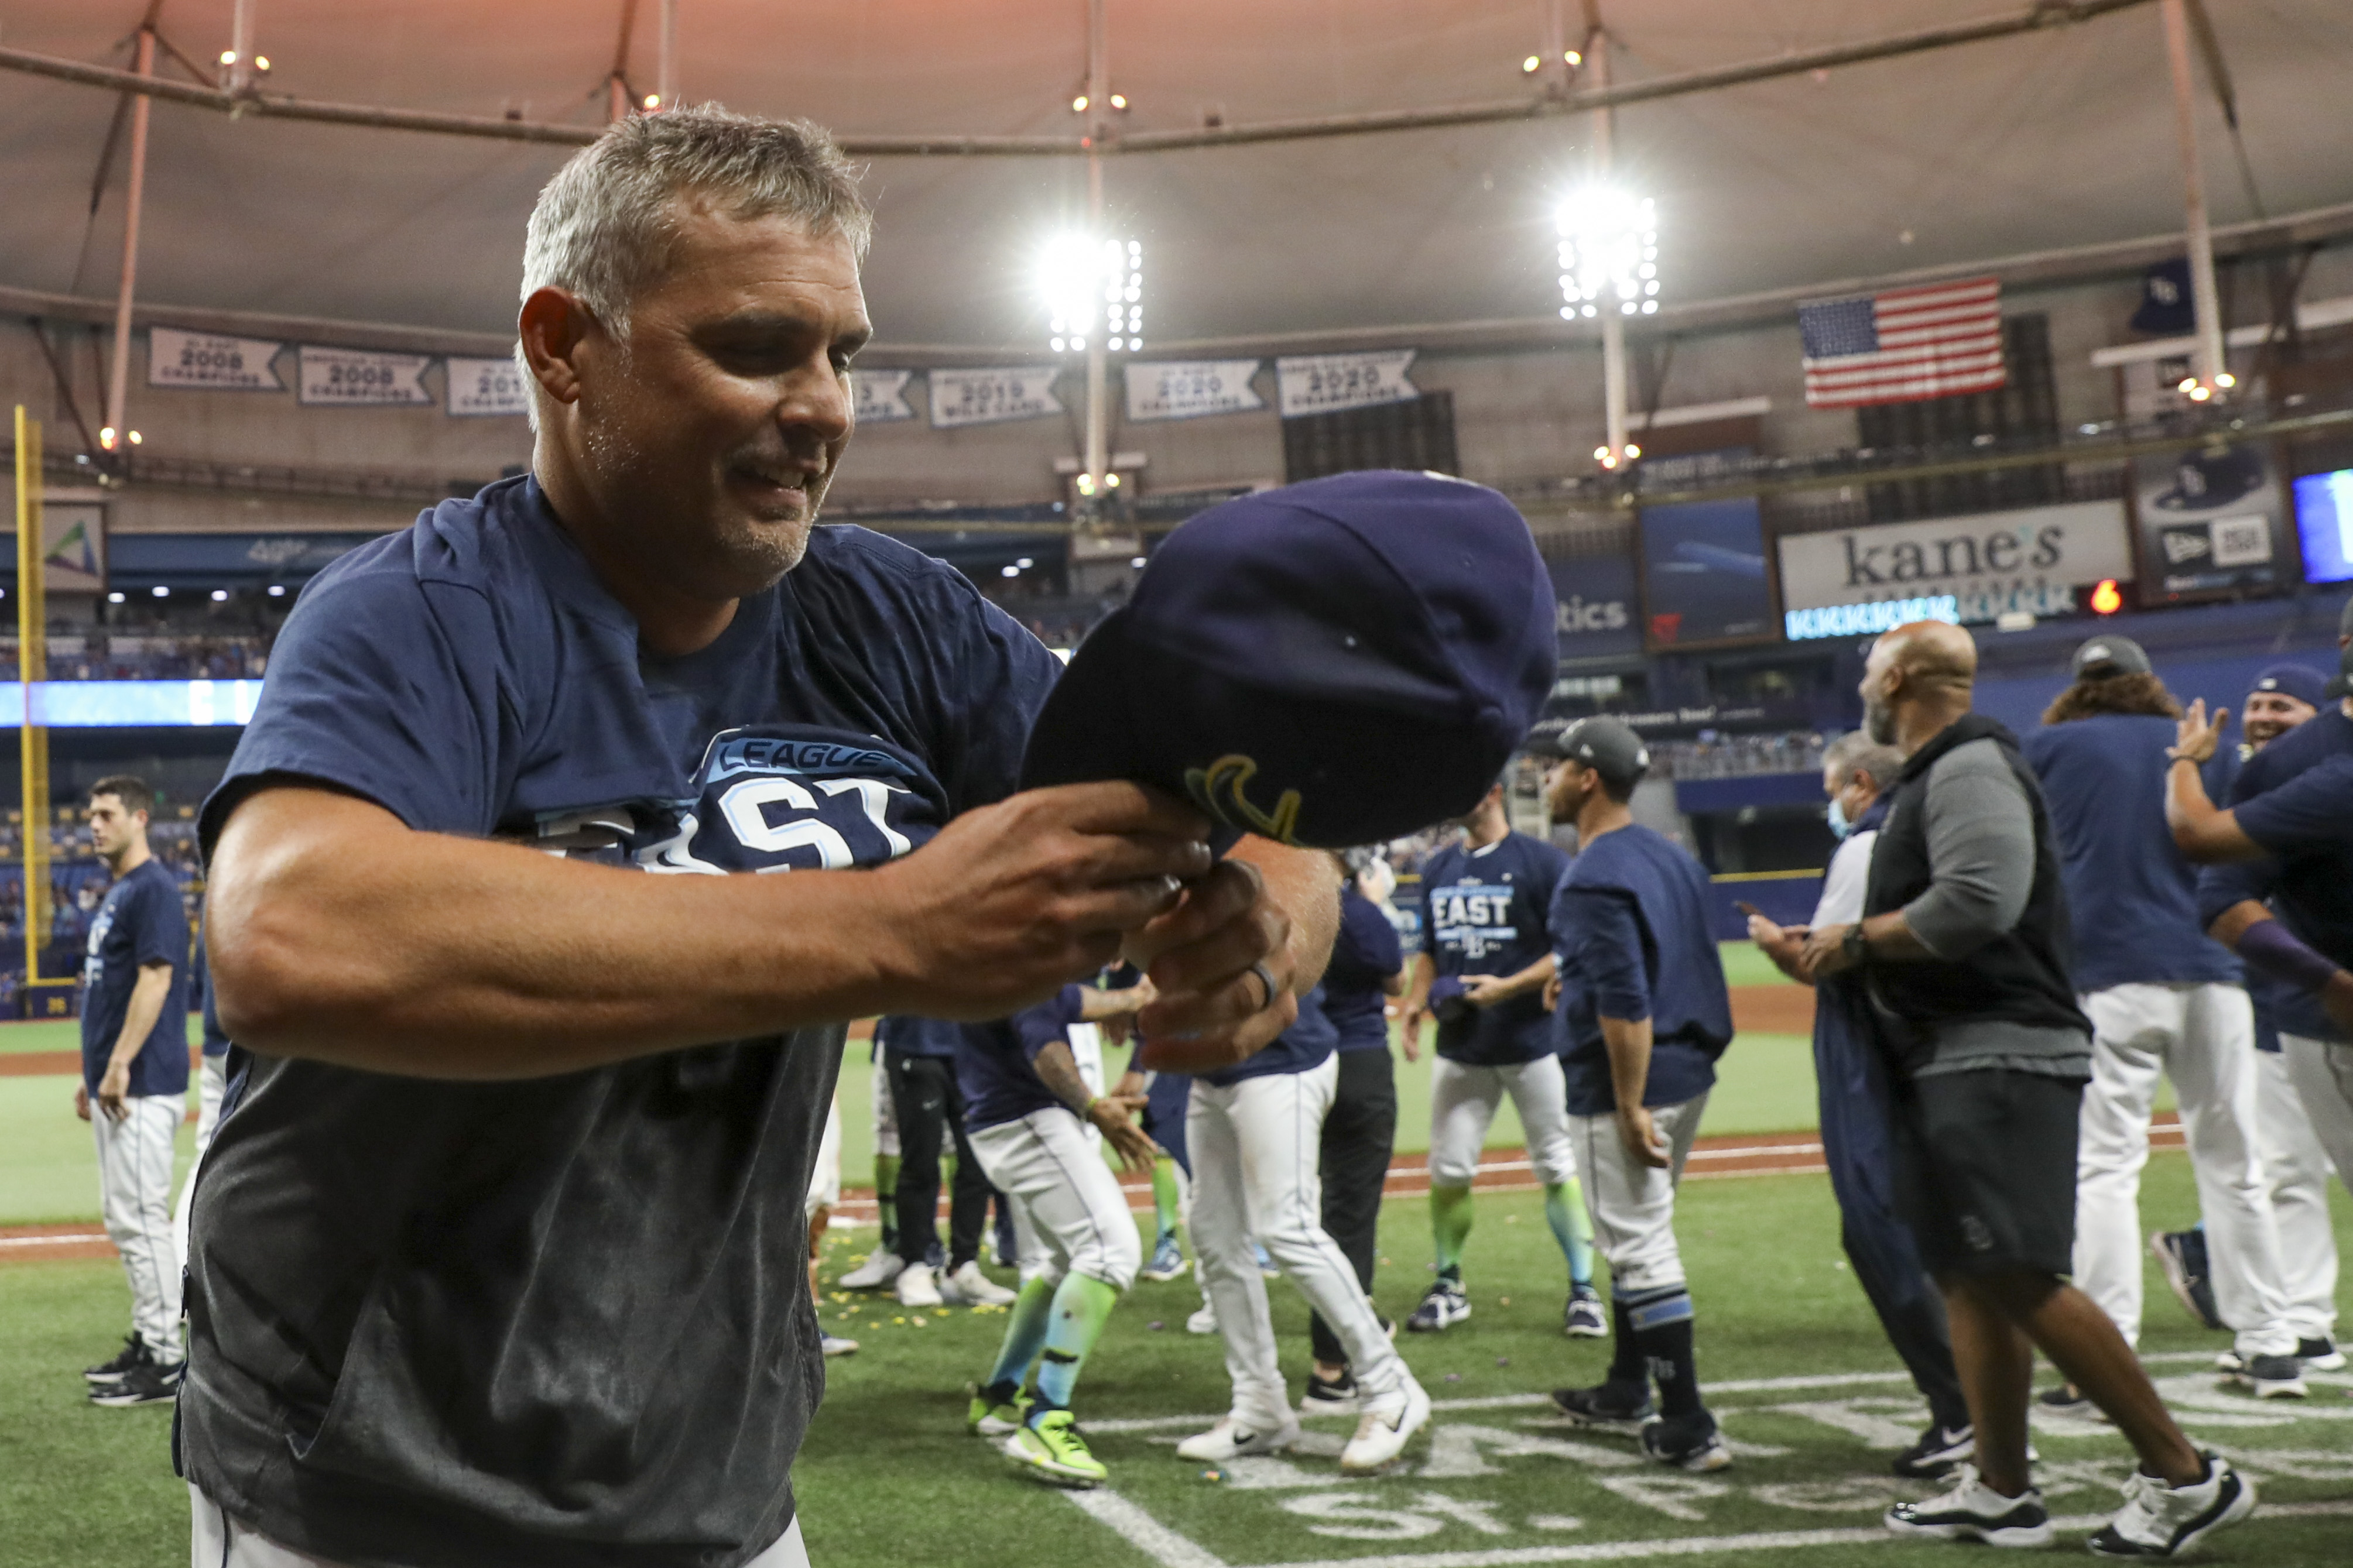 Columnist: Rays should use final years at Tropicana to build